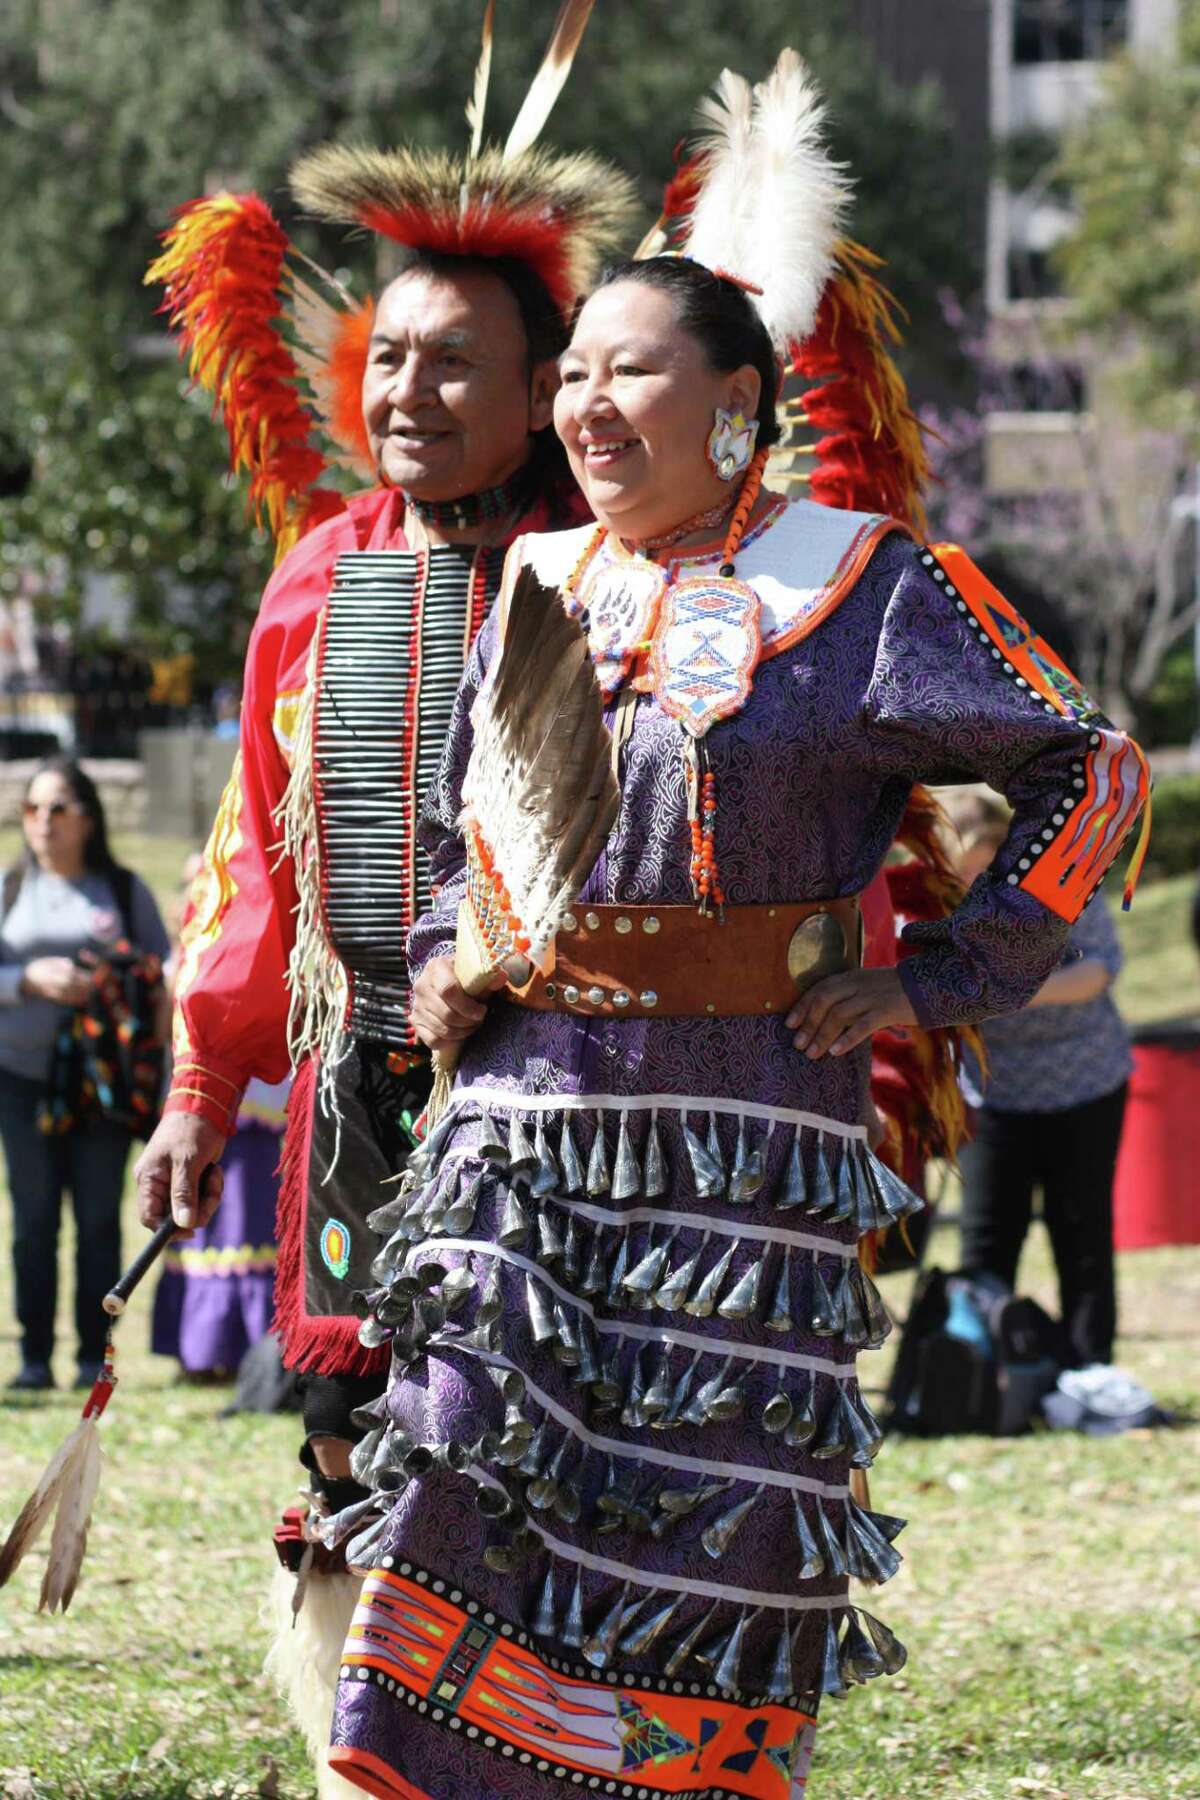 Yolanda Poncho, wearing a jingle dress, dances on the grounds of the State Capitol in Austin for Alabama-Coushatta Tribe of Texas Day on Feb. 15.